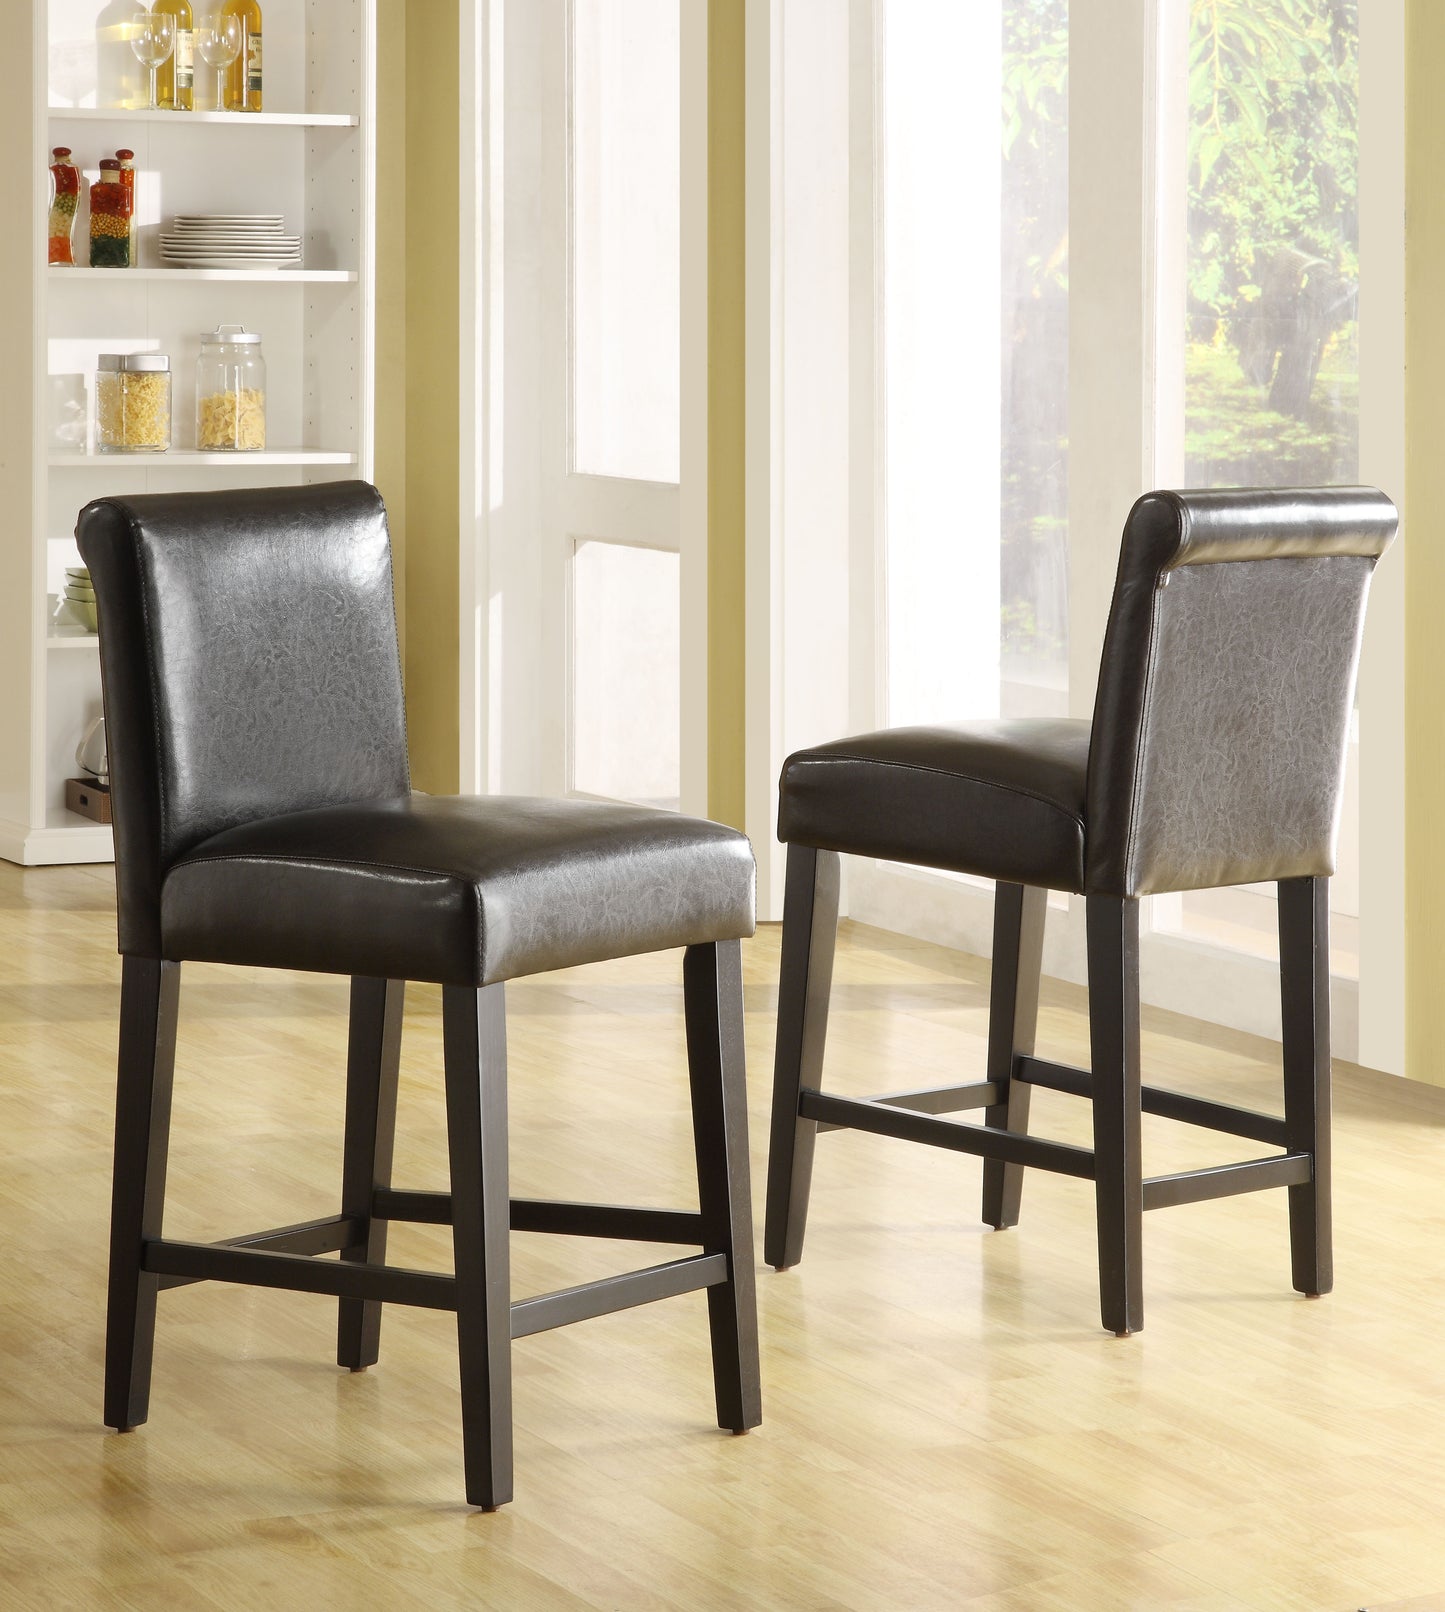 Faux Leather High Back Stools (Set of 2) - 24" Counter Height